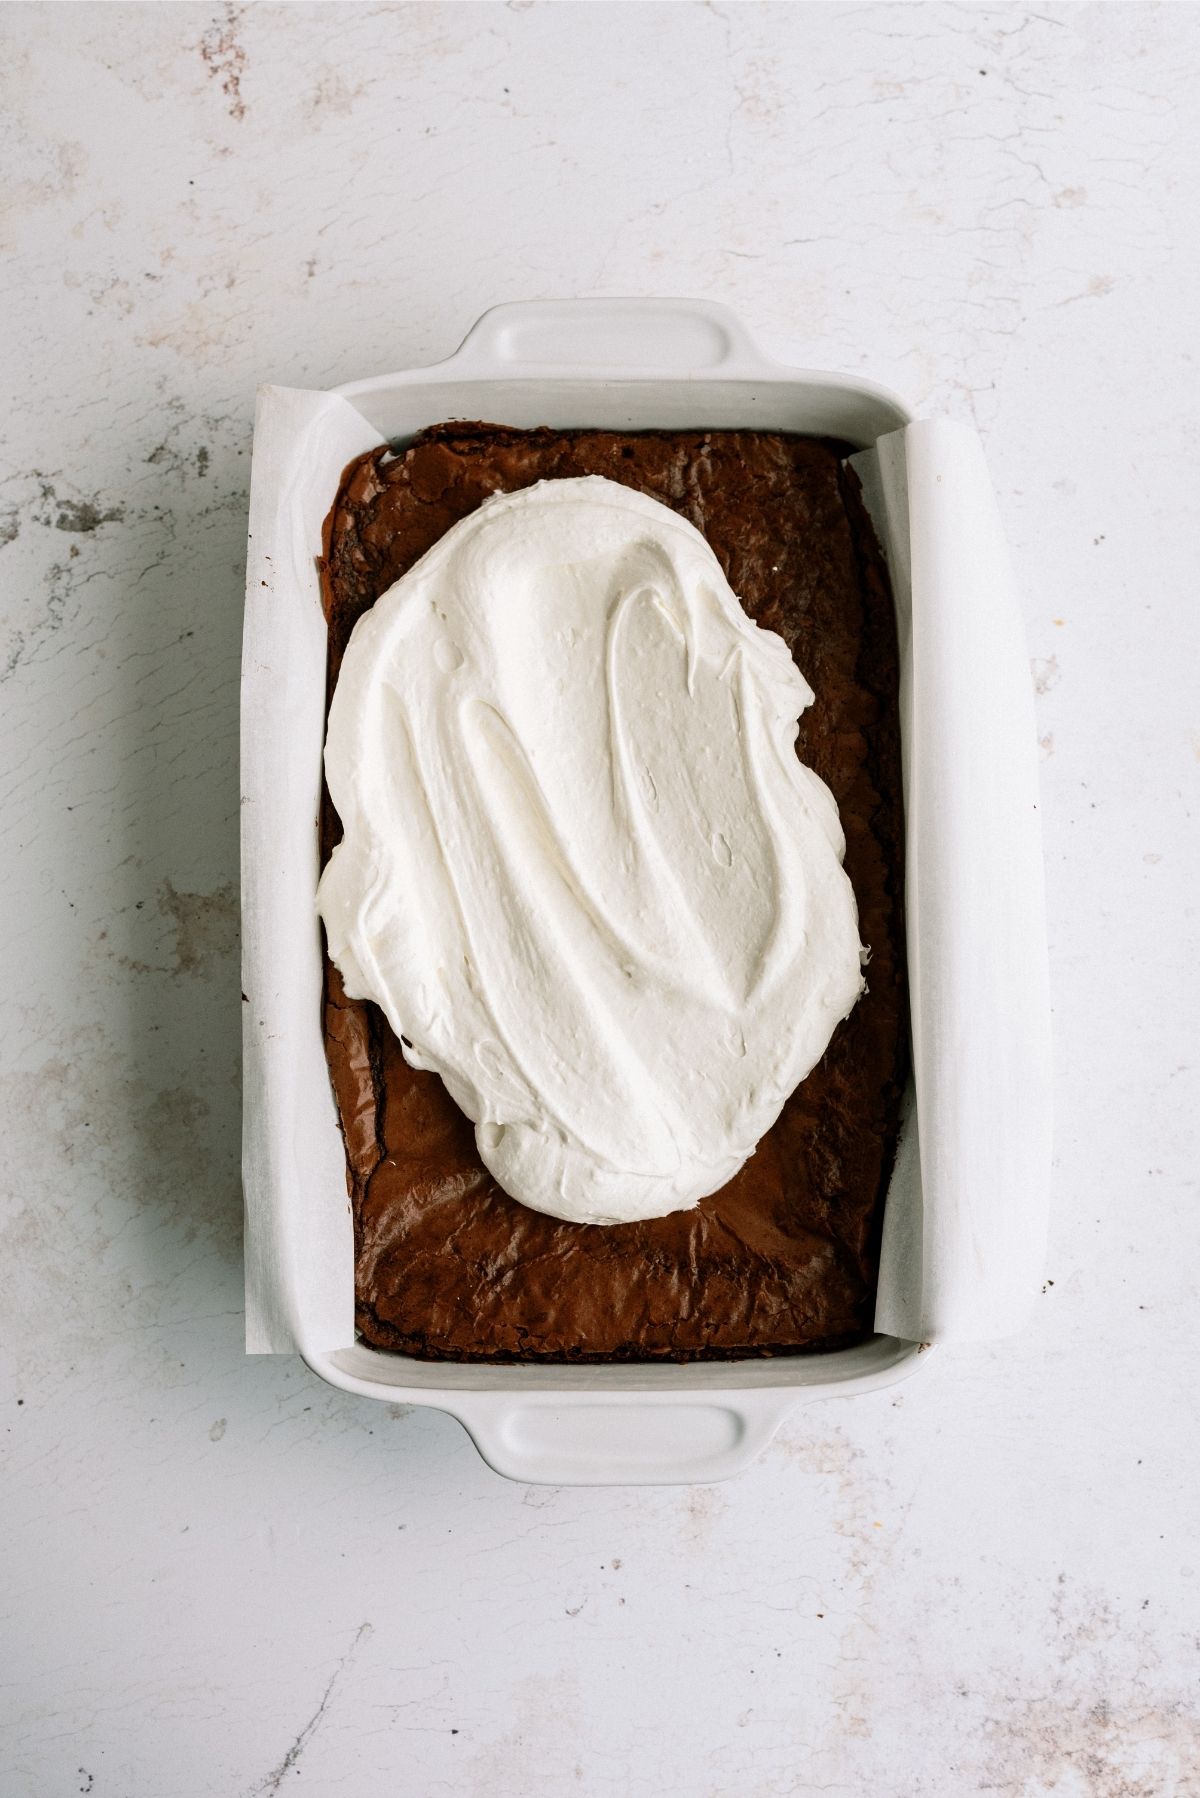 Cream cheese mixture spread over baked brownies